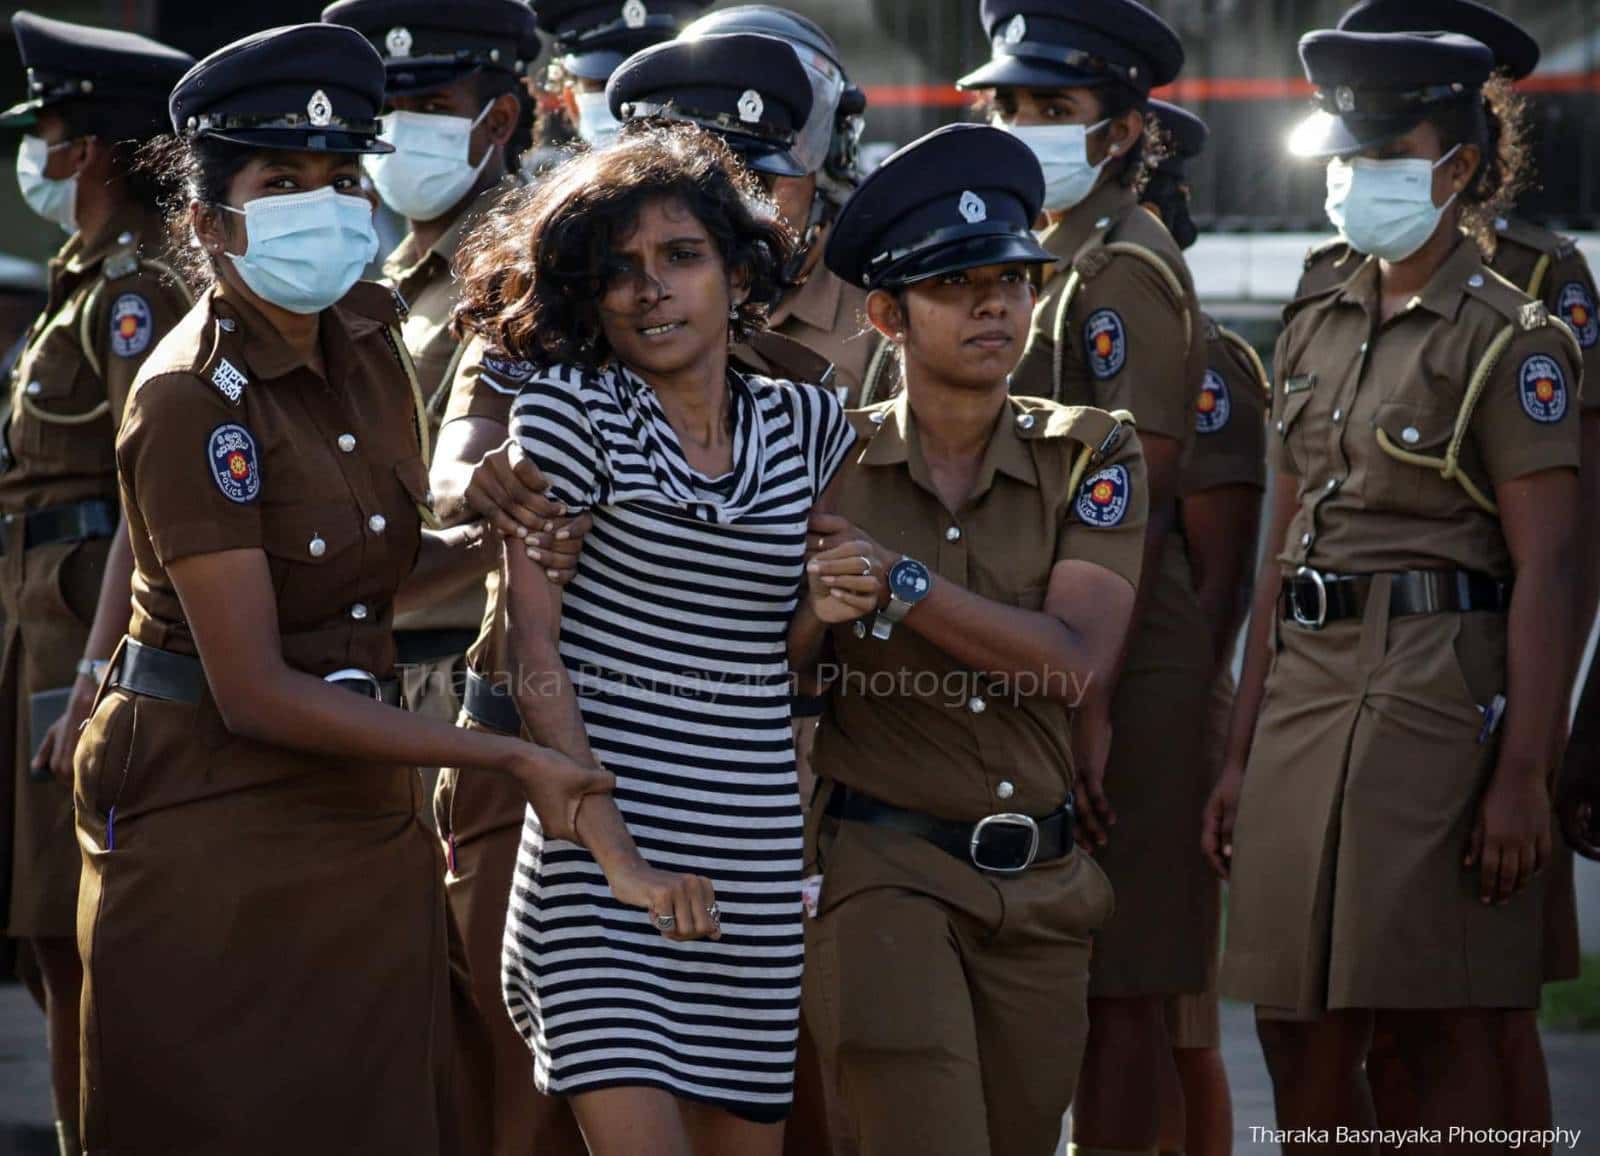 Melani is led away by two female police officers as more police look on.